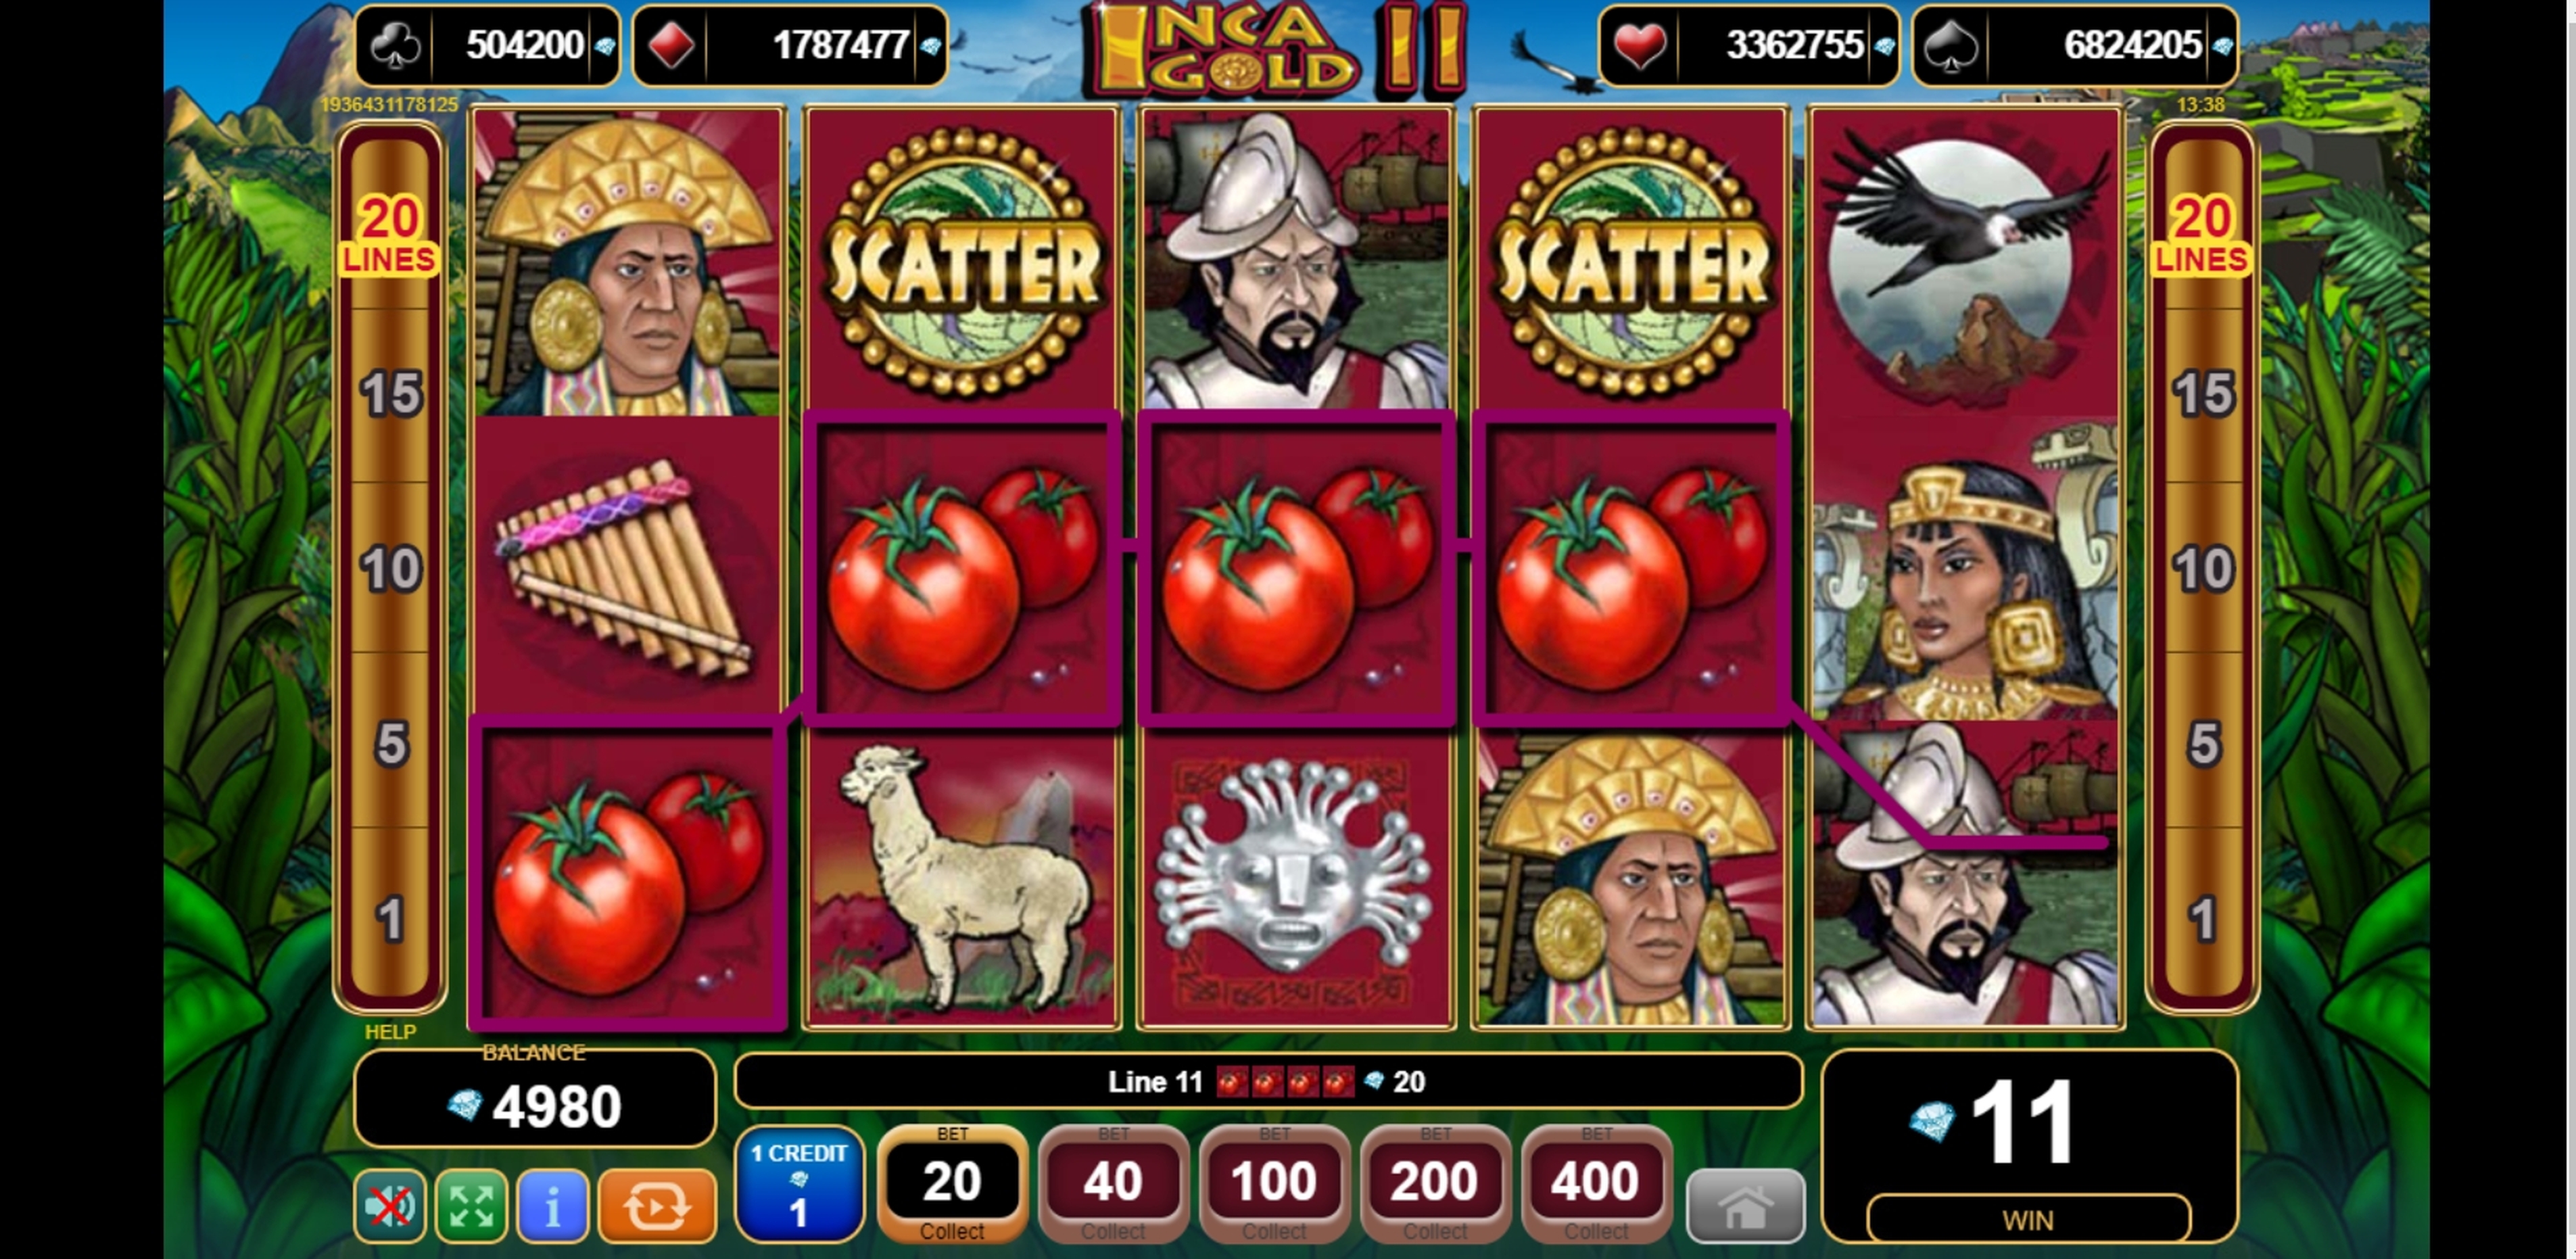 Win Money in Inca Gold II Free Slot Game by EGT